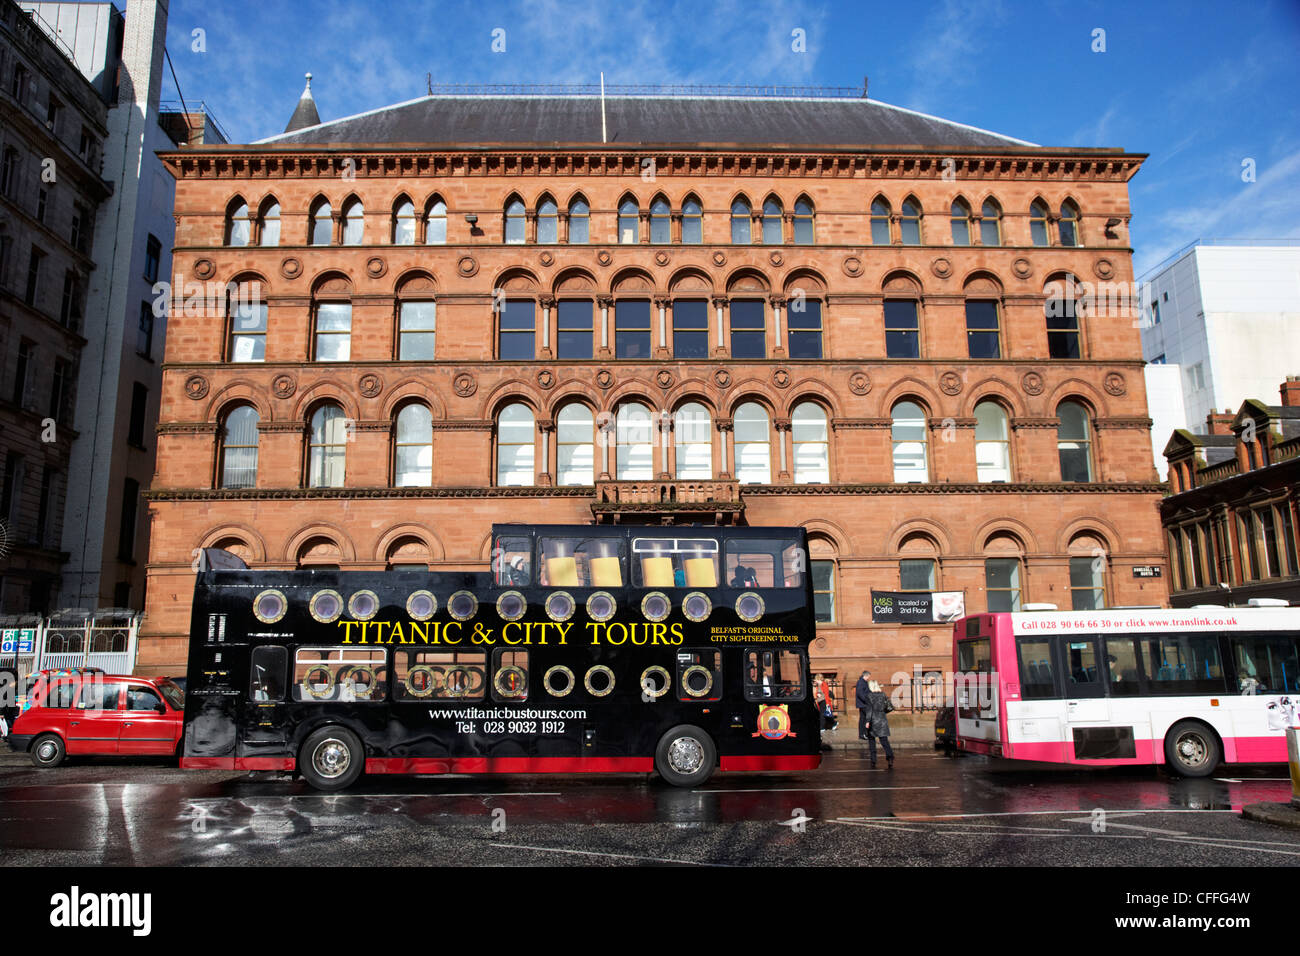 titanic and city open bus tours going past old richardson owden warehouse building donegall square north Belfast city centre Stock Photo